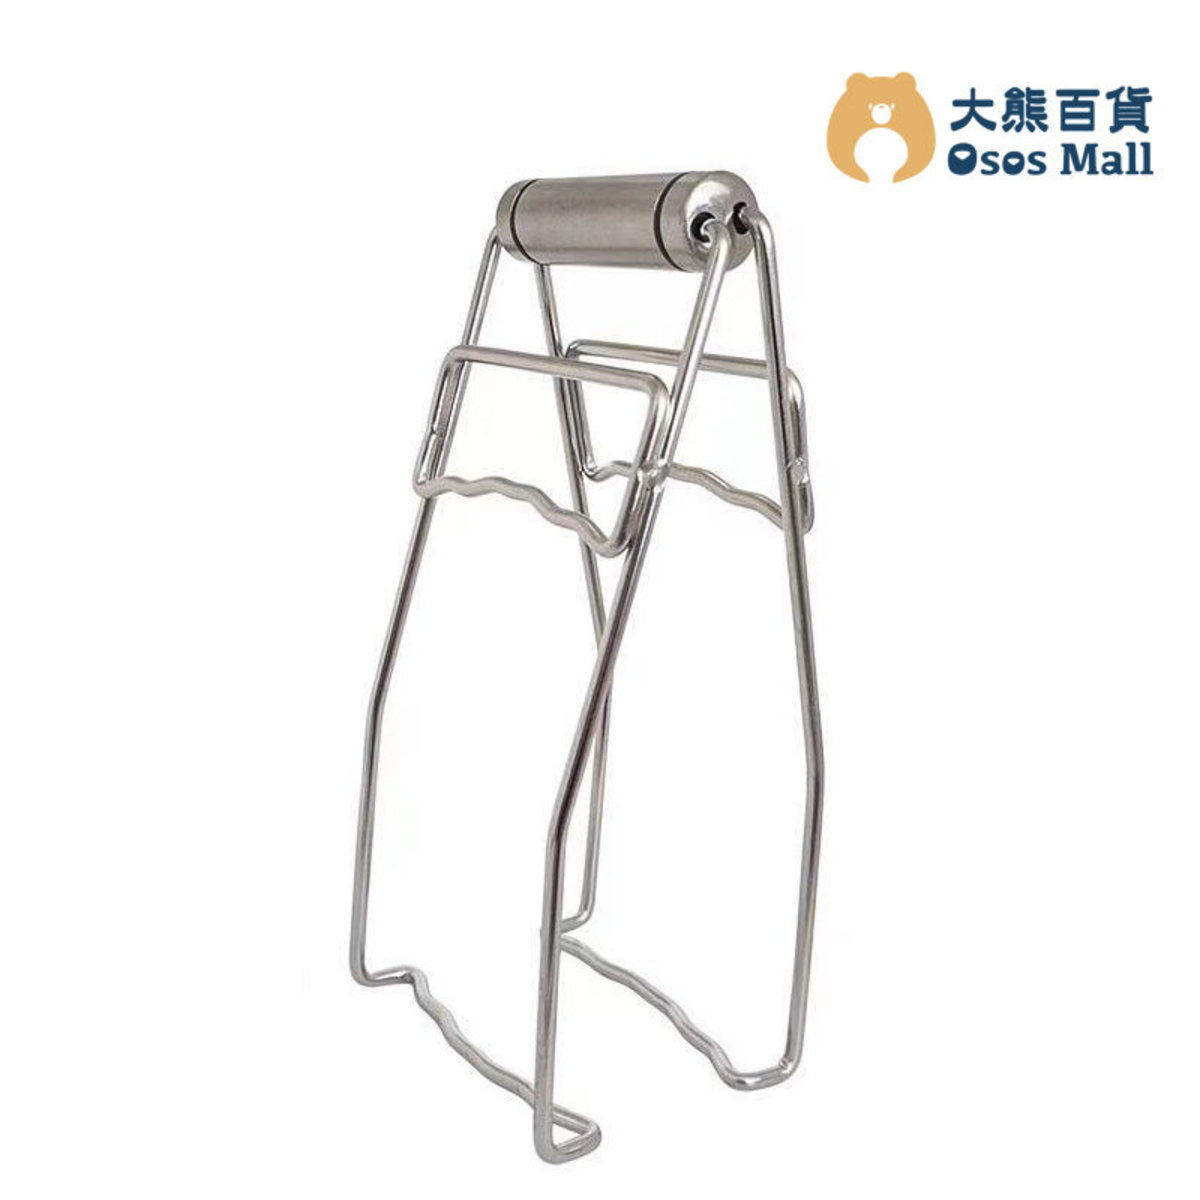 304 Stainless Steel Folding Hot Dish Plate Clip (1pc) (OSKU042)